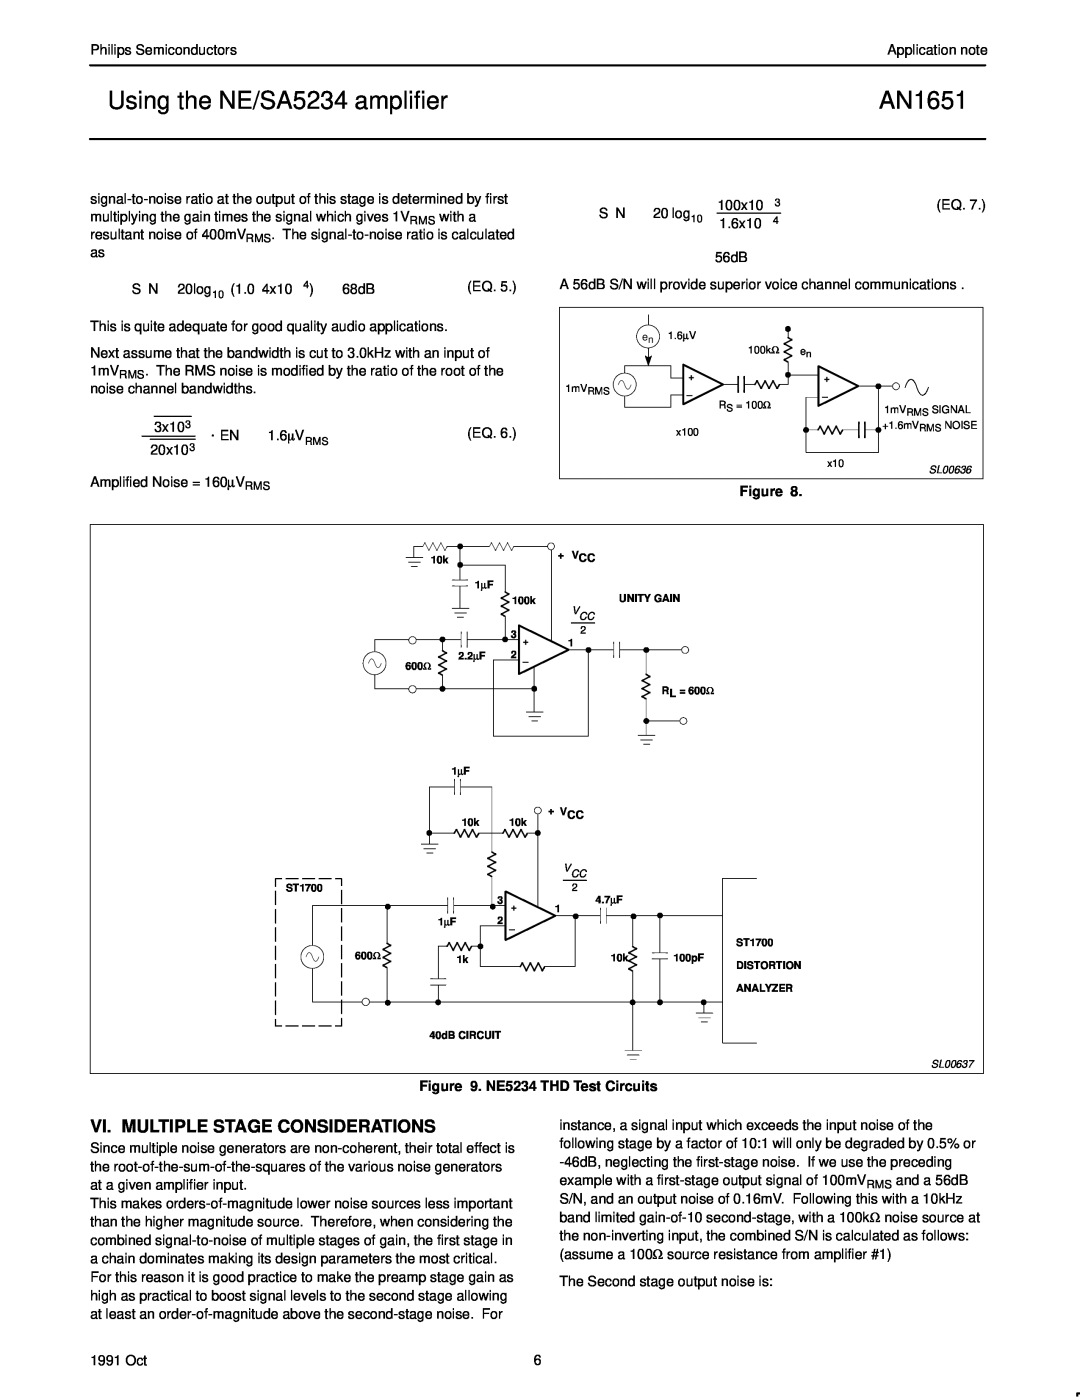 Philips AN1651 manual Vi. Multiple Stage Considerations, NE5234 THD Test Circuits, Using the NE/SA5234 amplifier 